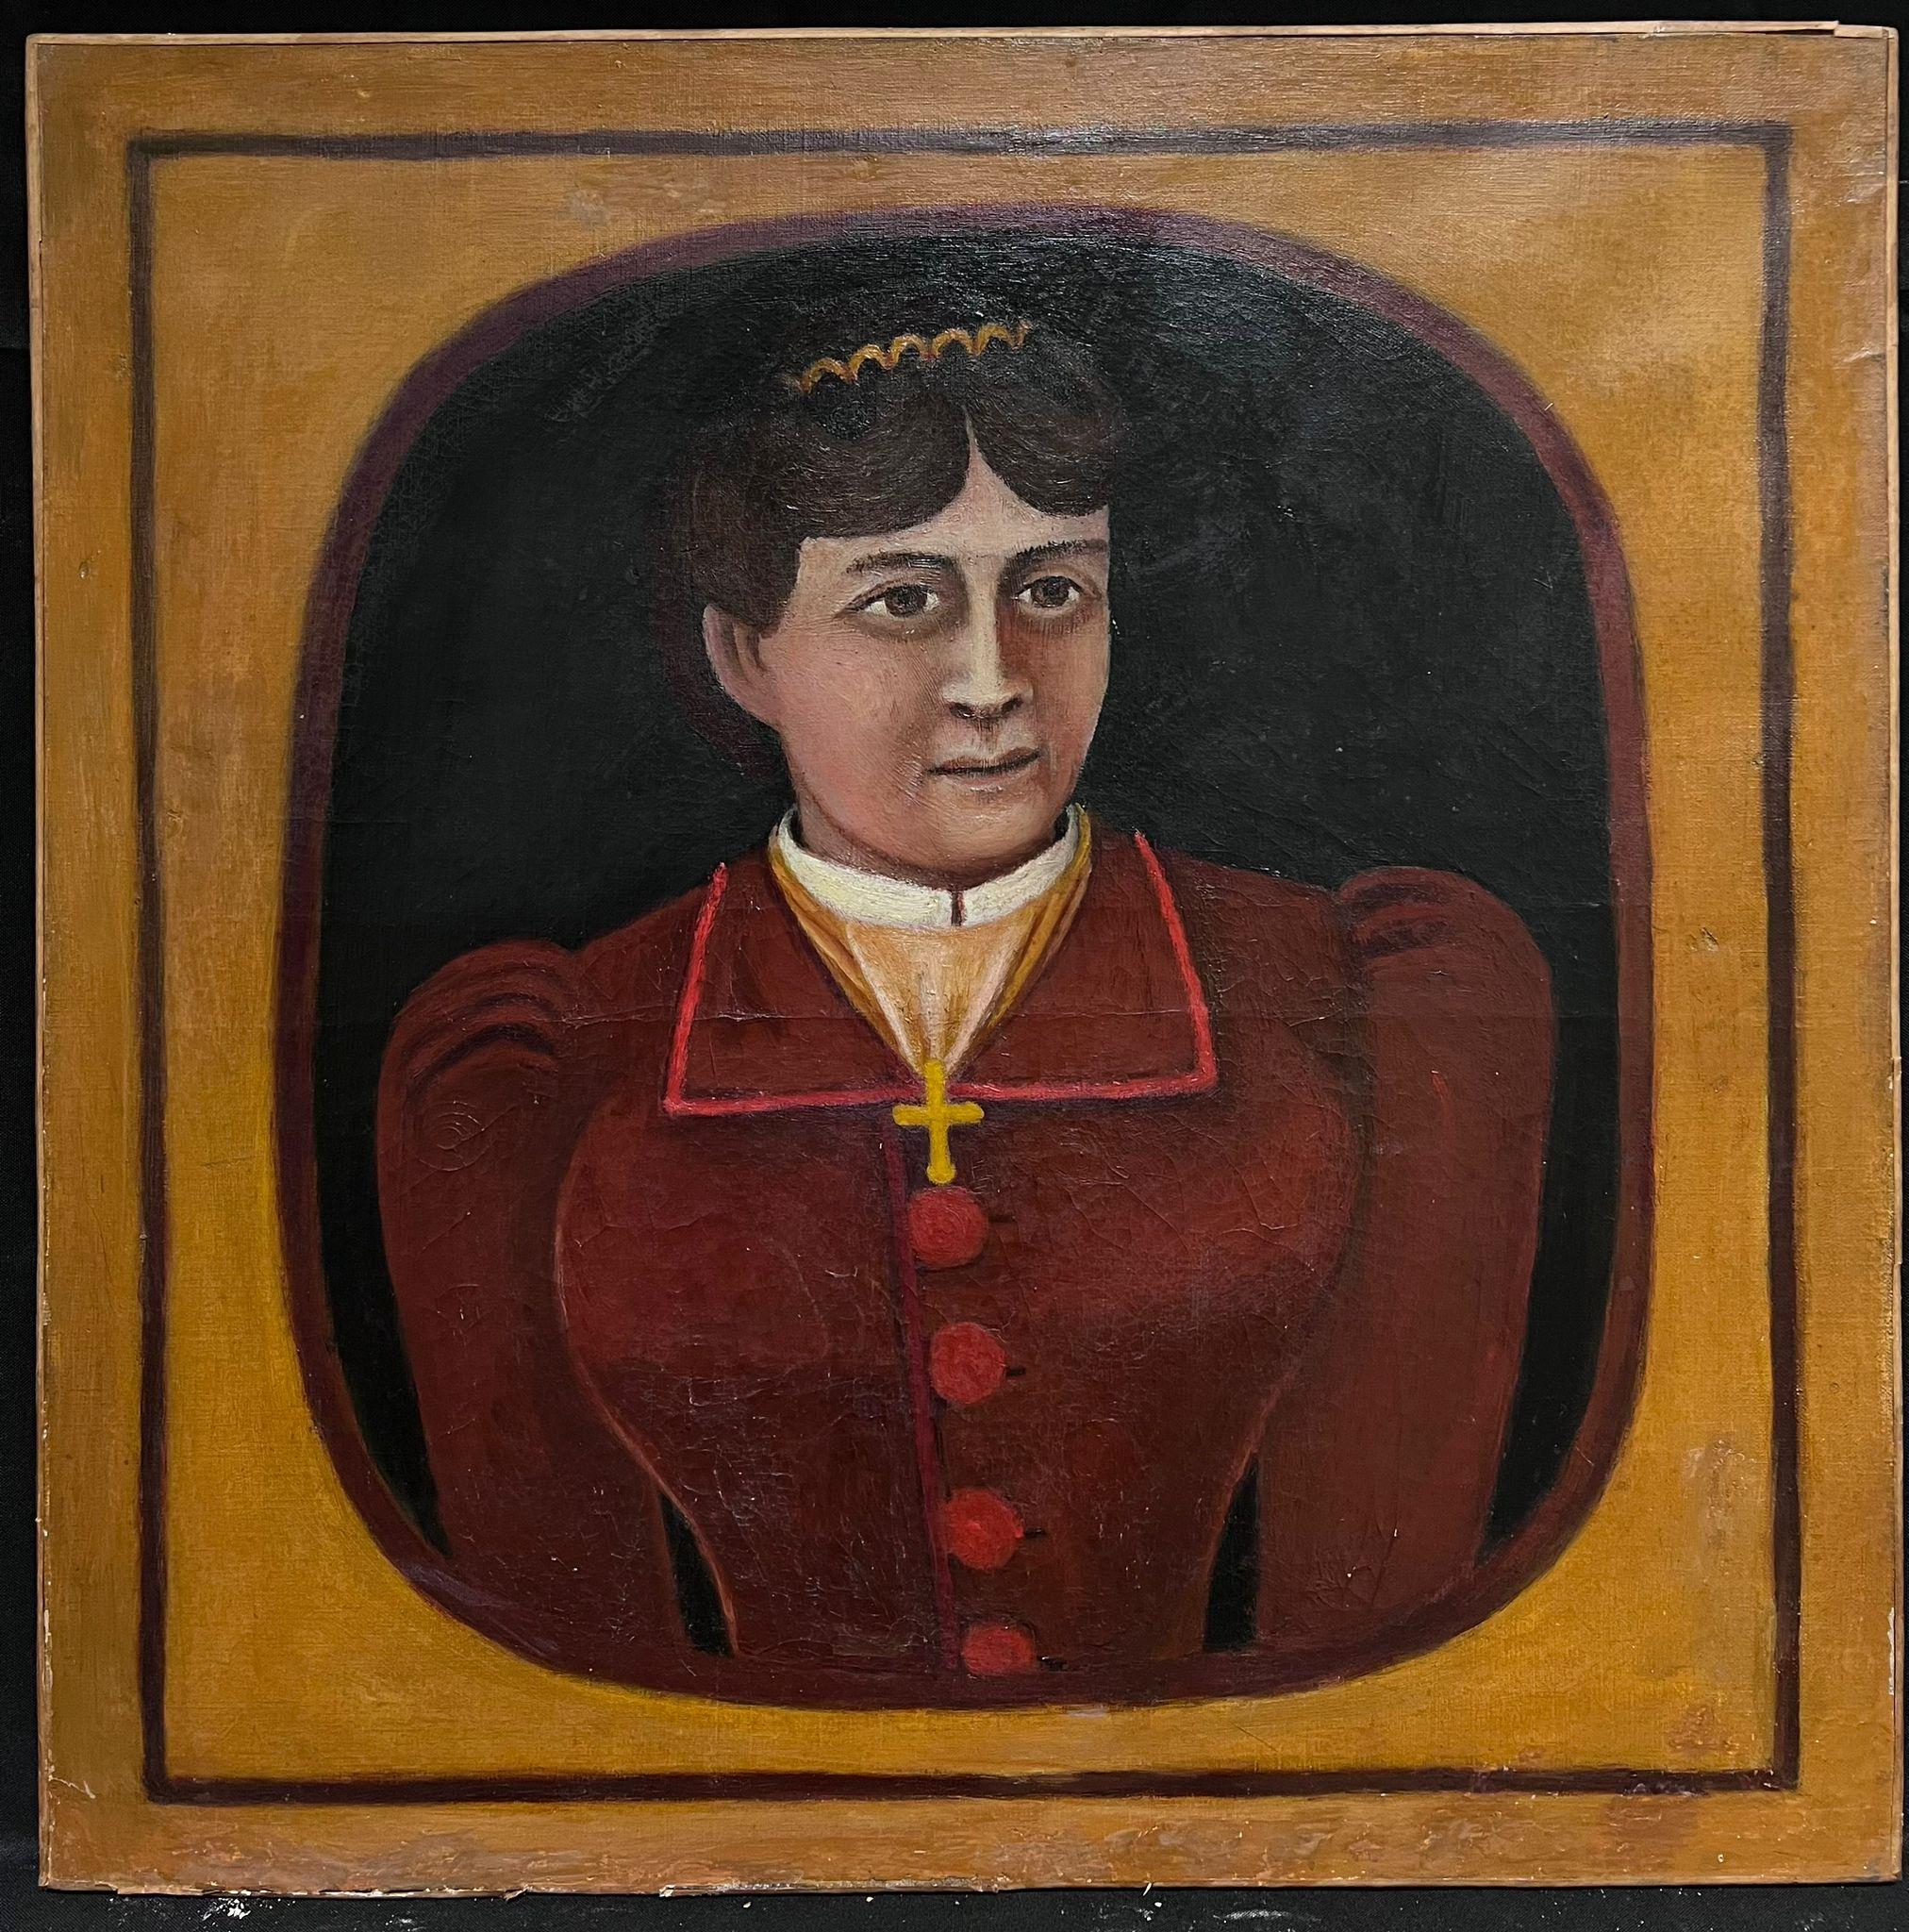 19th Century French Naive Portrait of Lady Large Oil Painting on Canvas - Brown Figurative Painting by Henri Rousseau